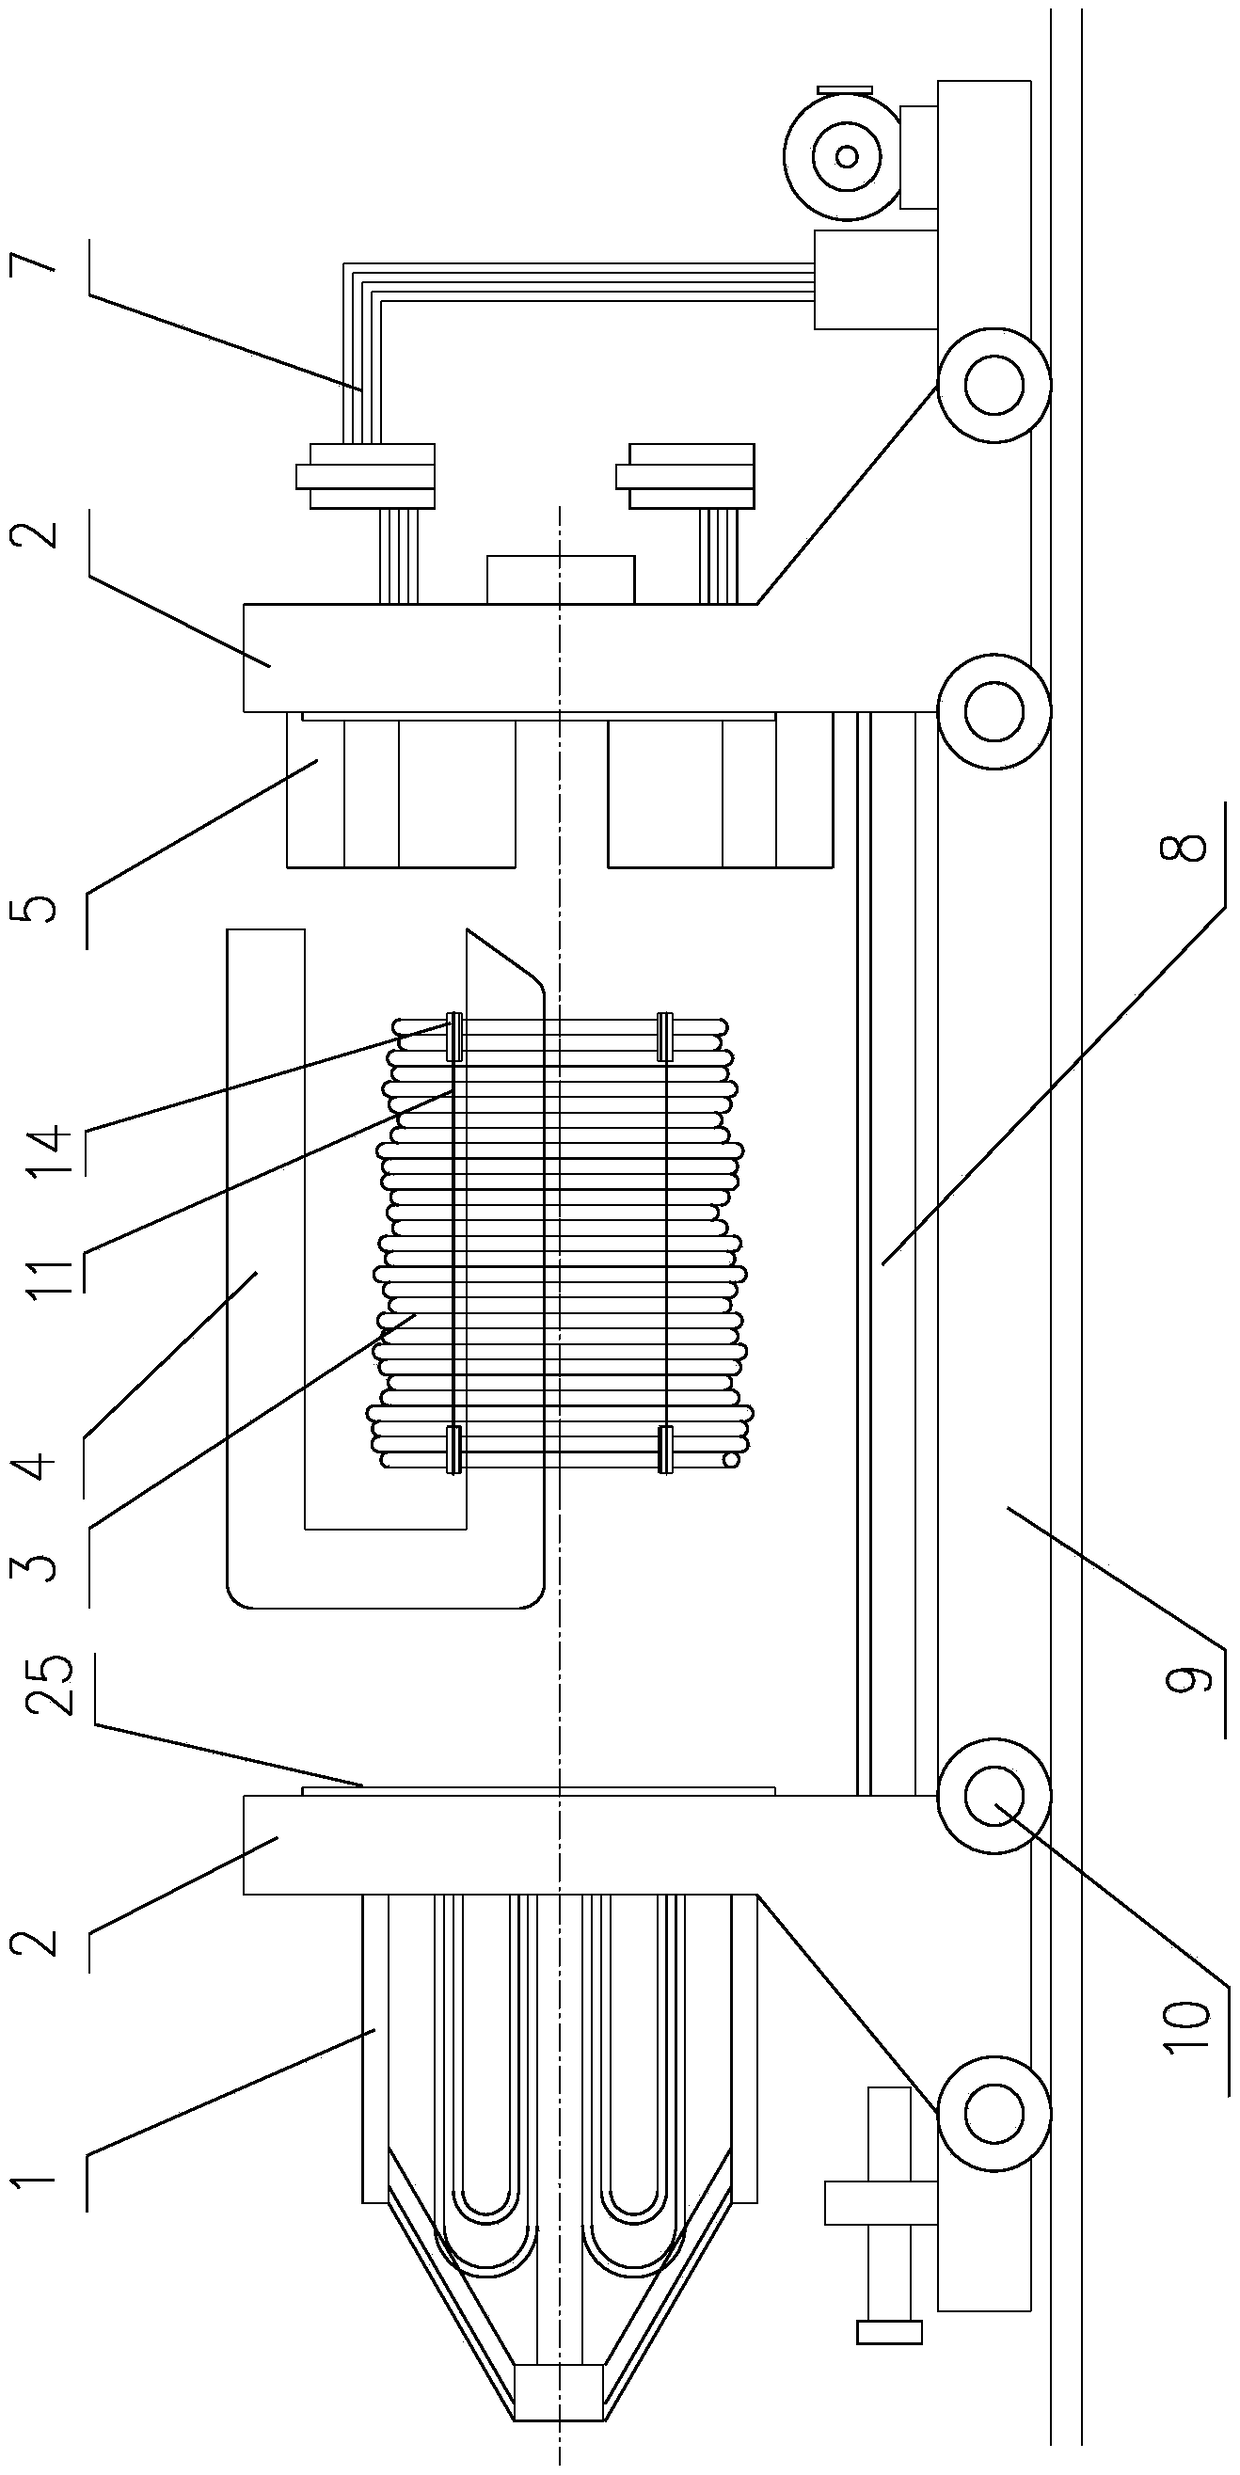 Gasket placement mechanism of high speed wire rod packer, and gasket structure